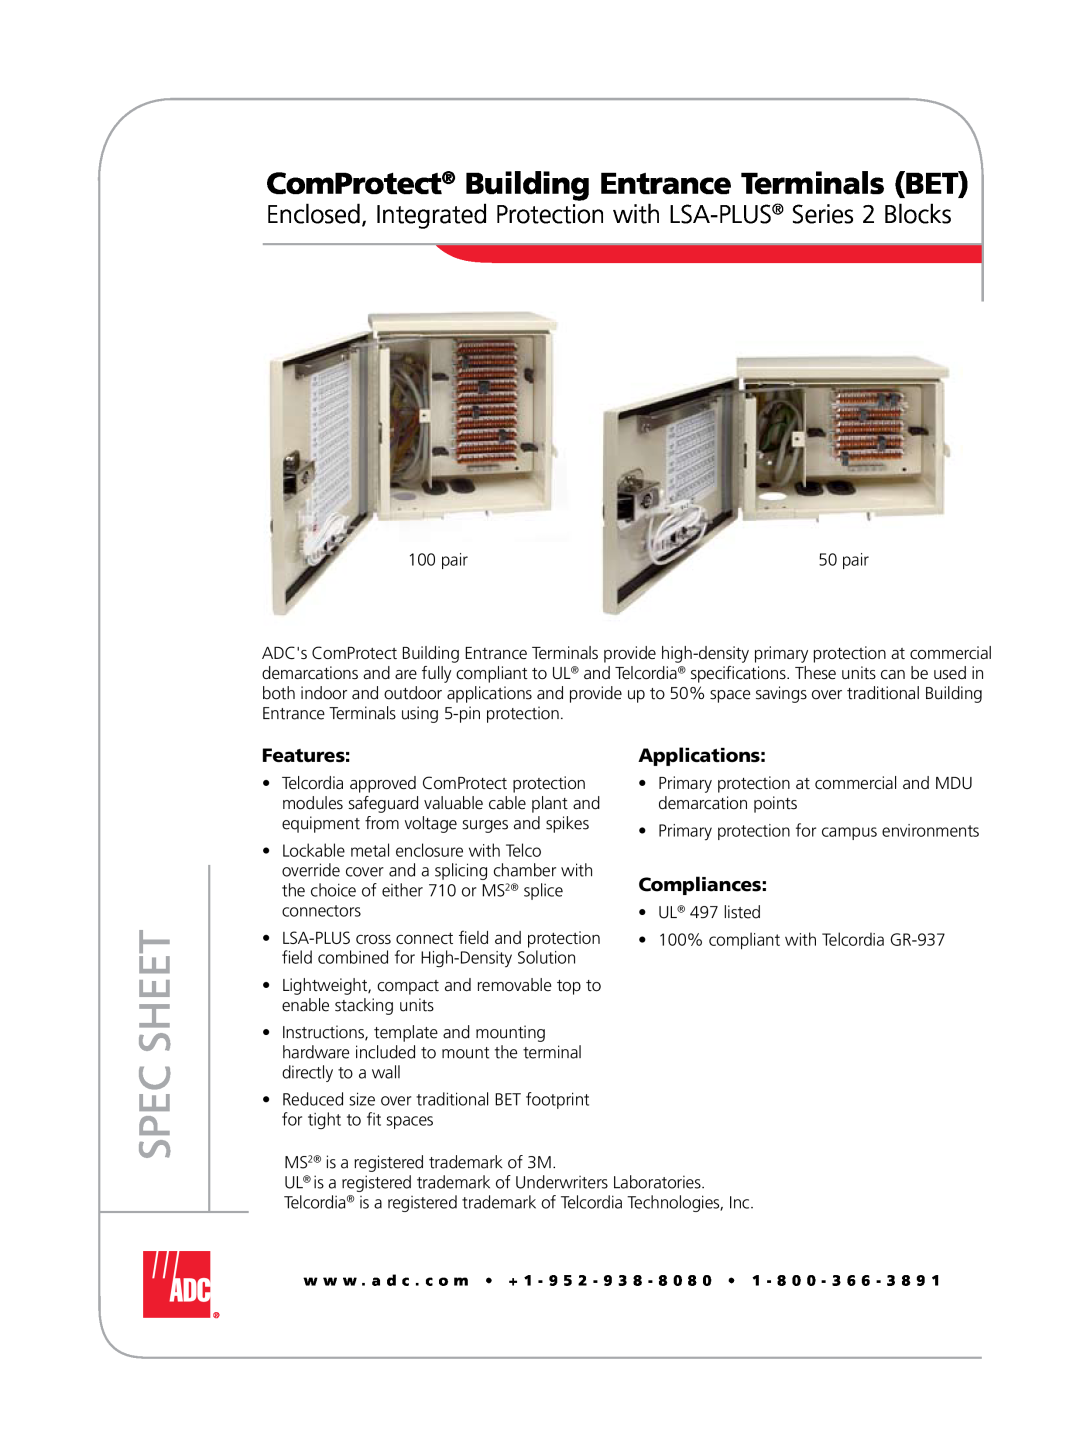 ADC Building Entrance Terminals (BET) specifications Enclosed, Integrated Protection with LSA-PLUS Series 2 Blocks 